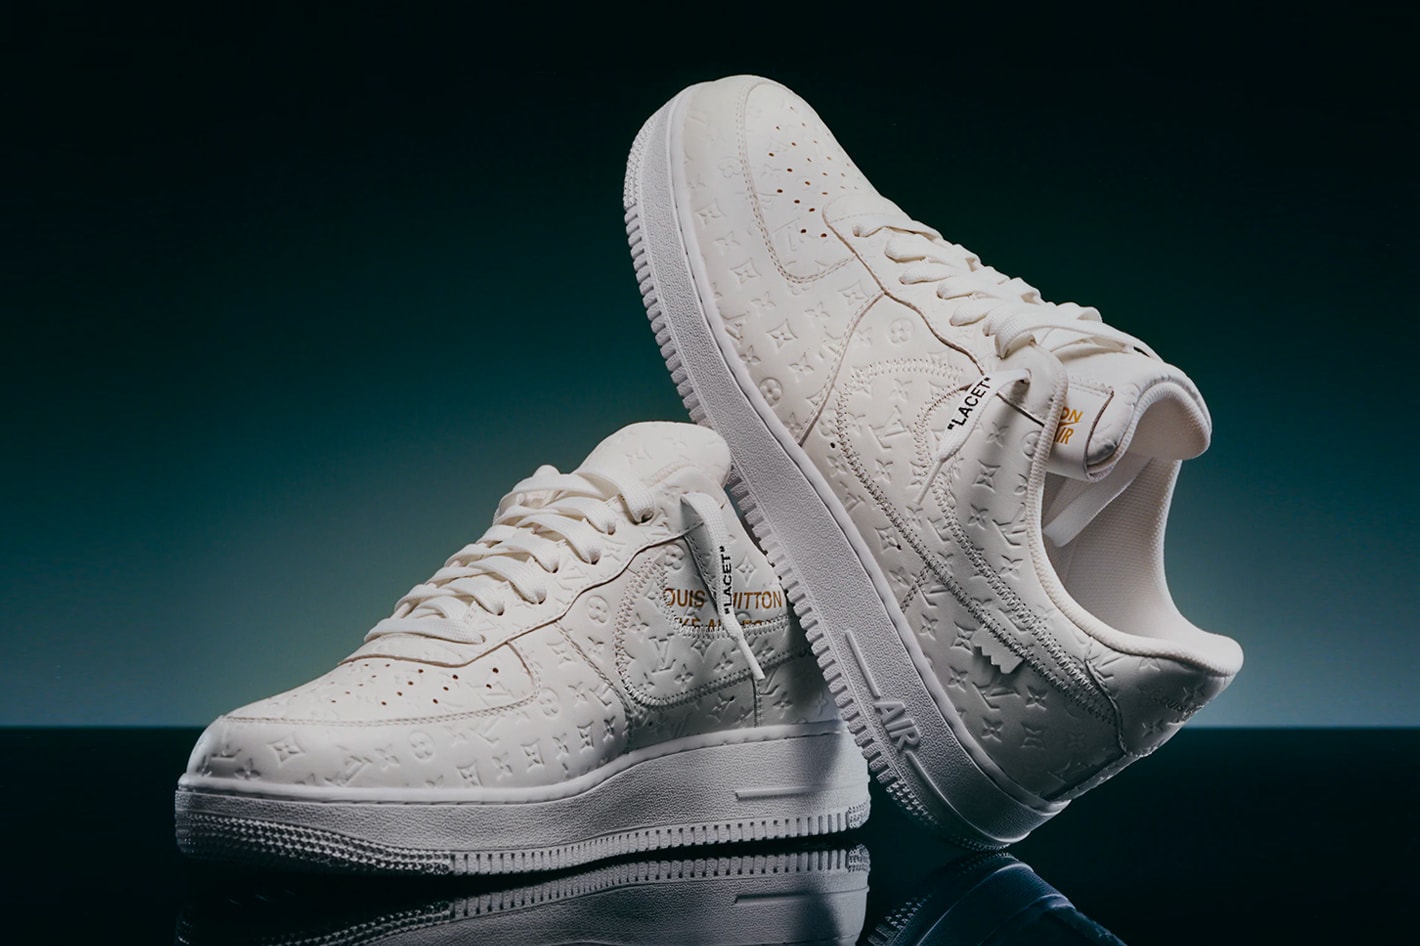 Louis Vuitton x Nike Air Force 1 Release Date, Price Confirmed